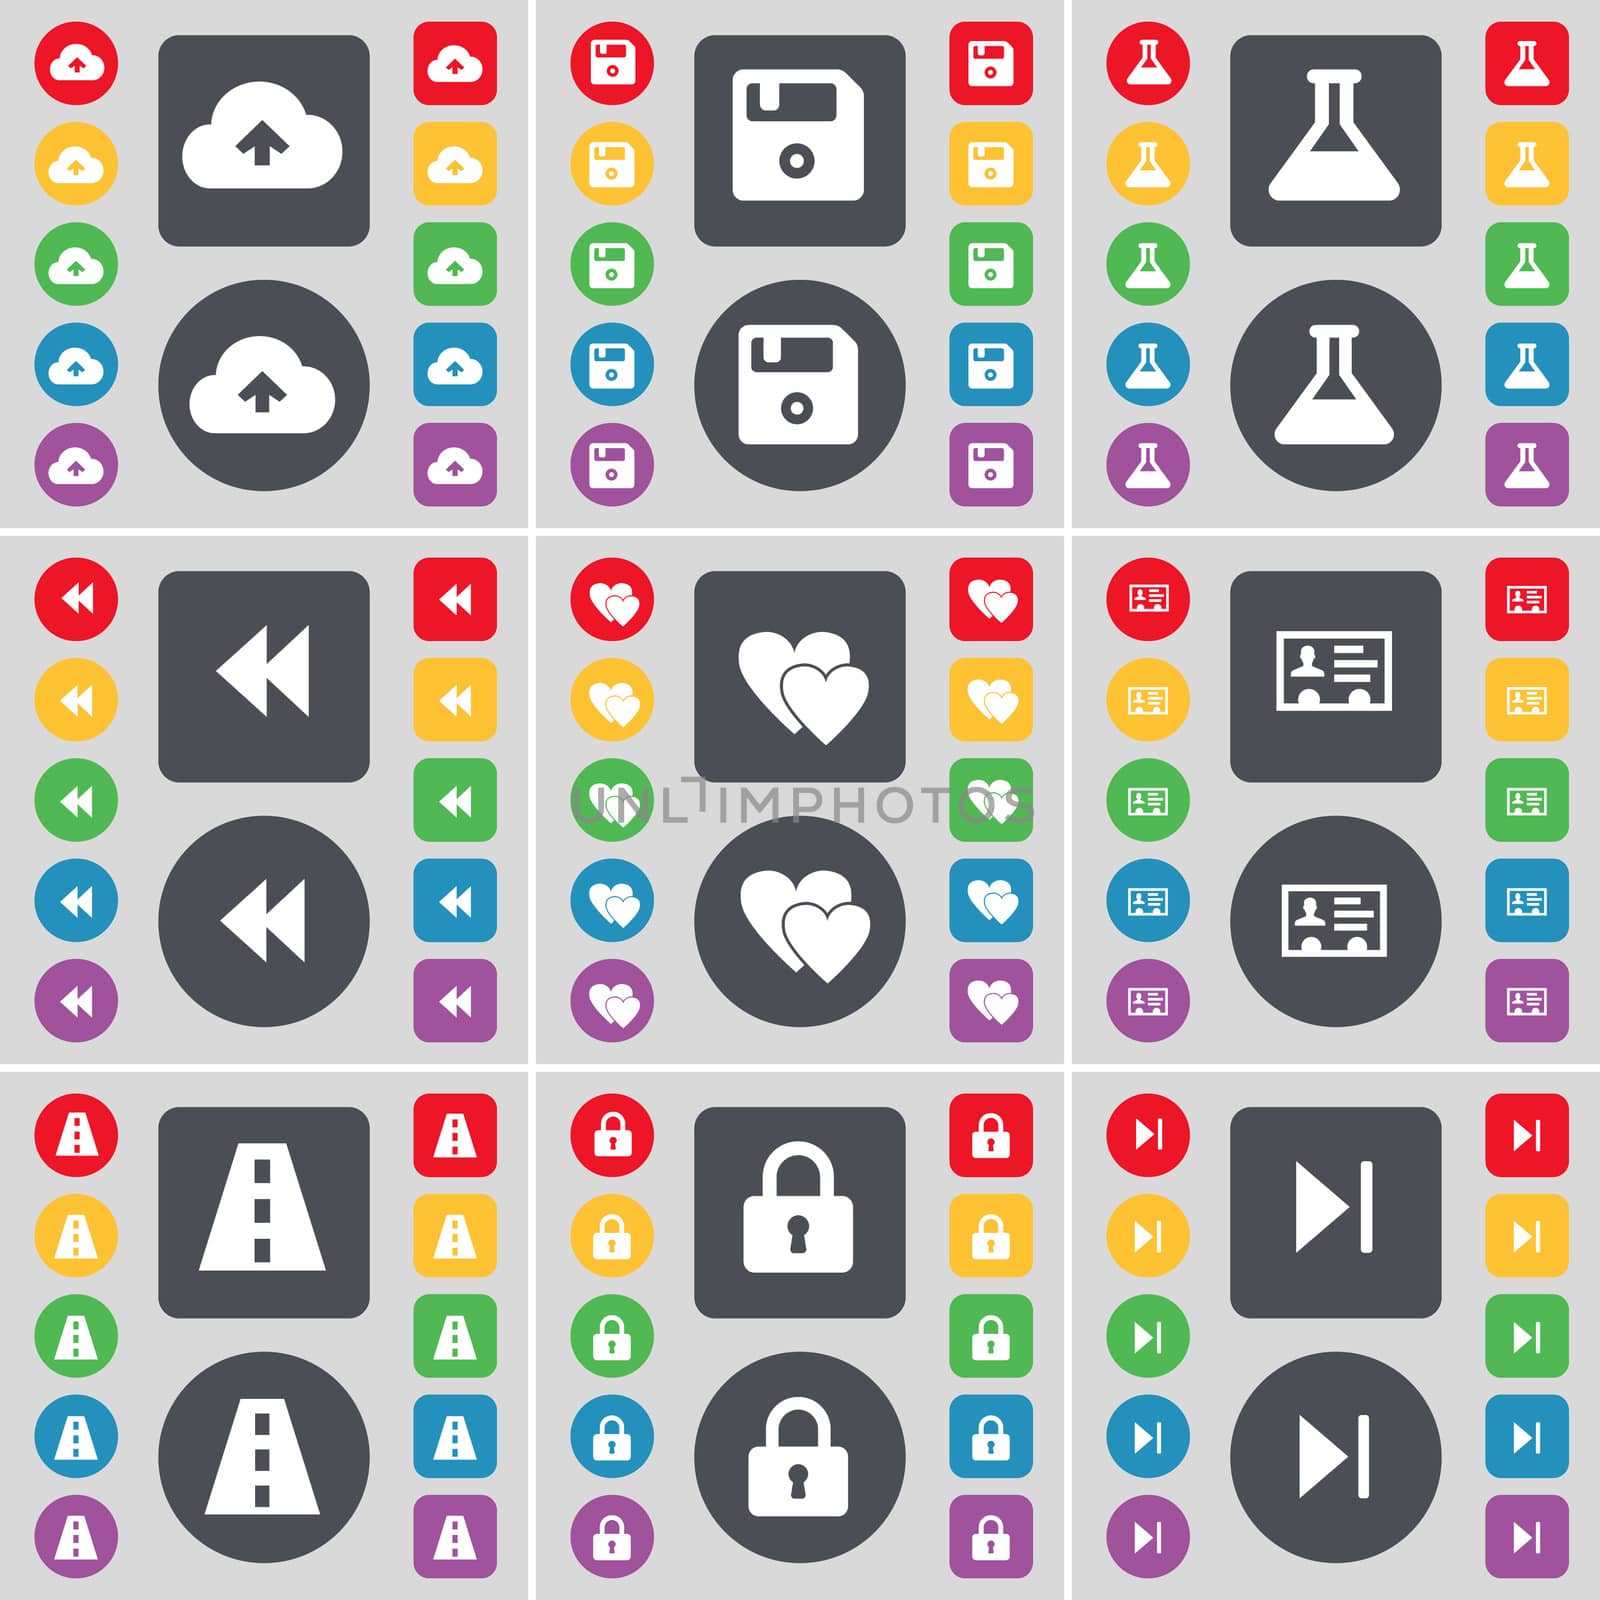 Cloud, Floppy, Flask, Rewind, Heart, Contact, Road, Lock, Media skip icon symbol. A large set of flat, colored buttons for your design. illustration